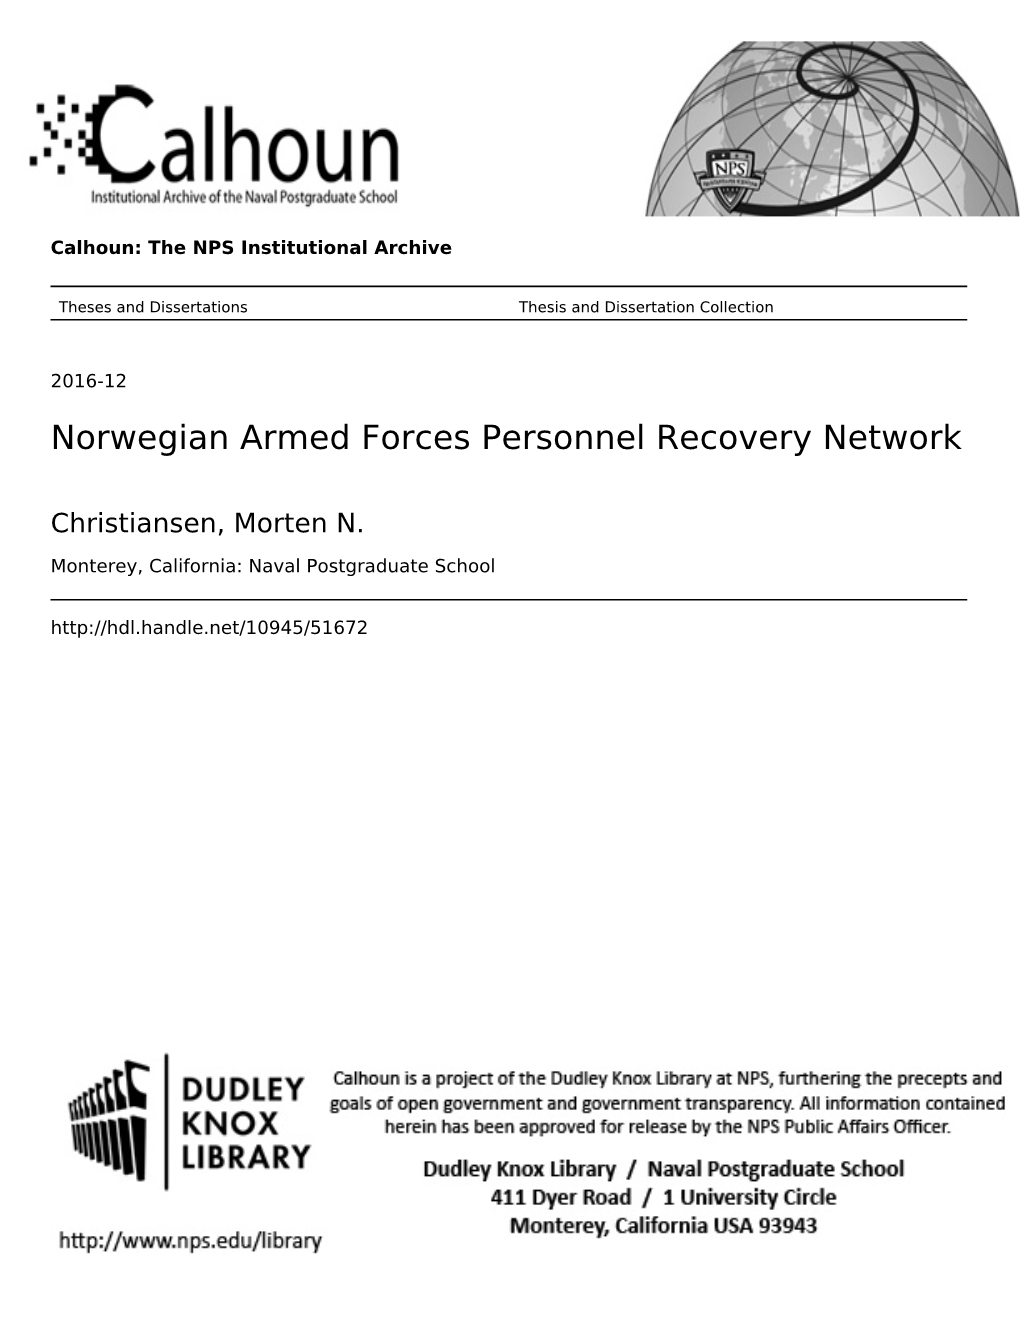 Norwegian Armed Forces Personnel Recovery Network